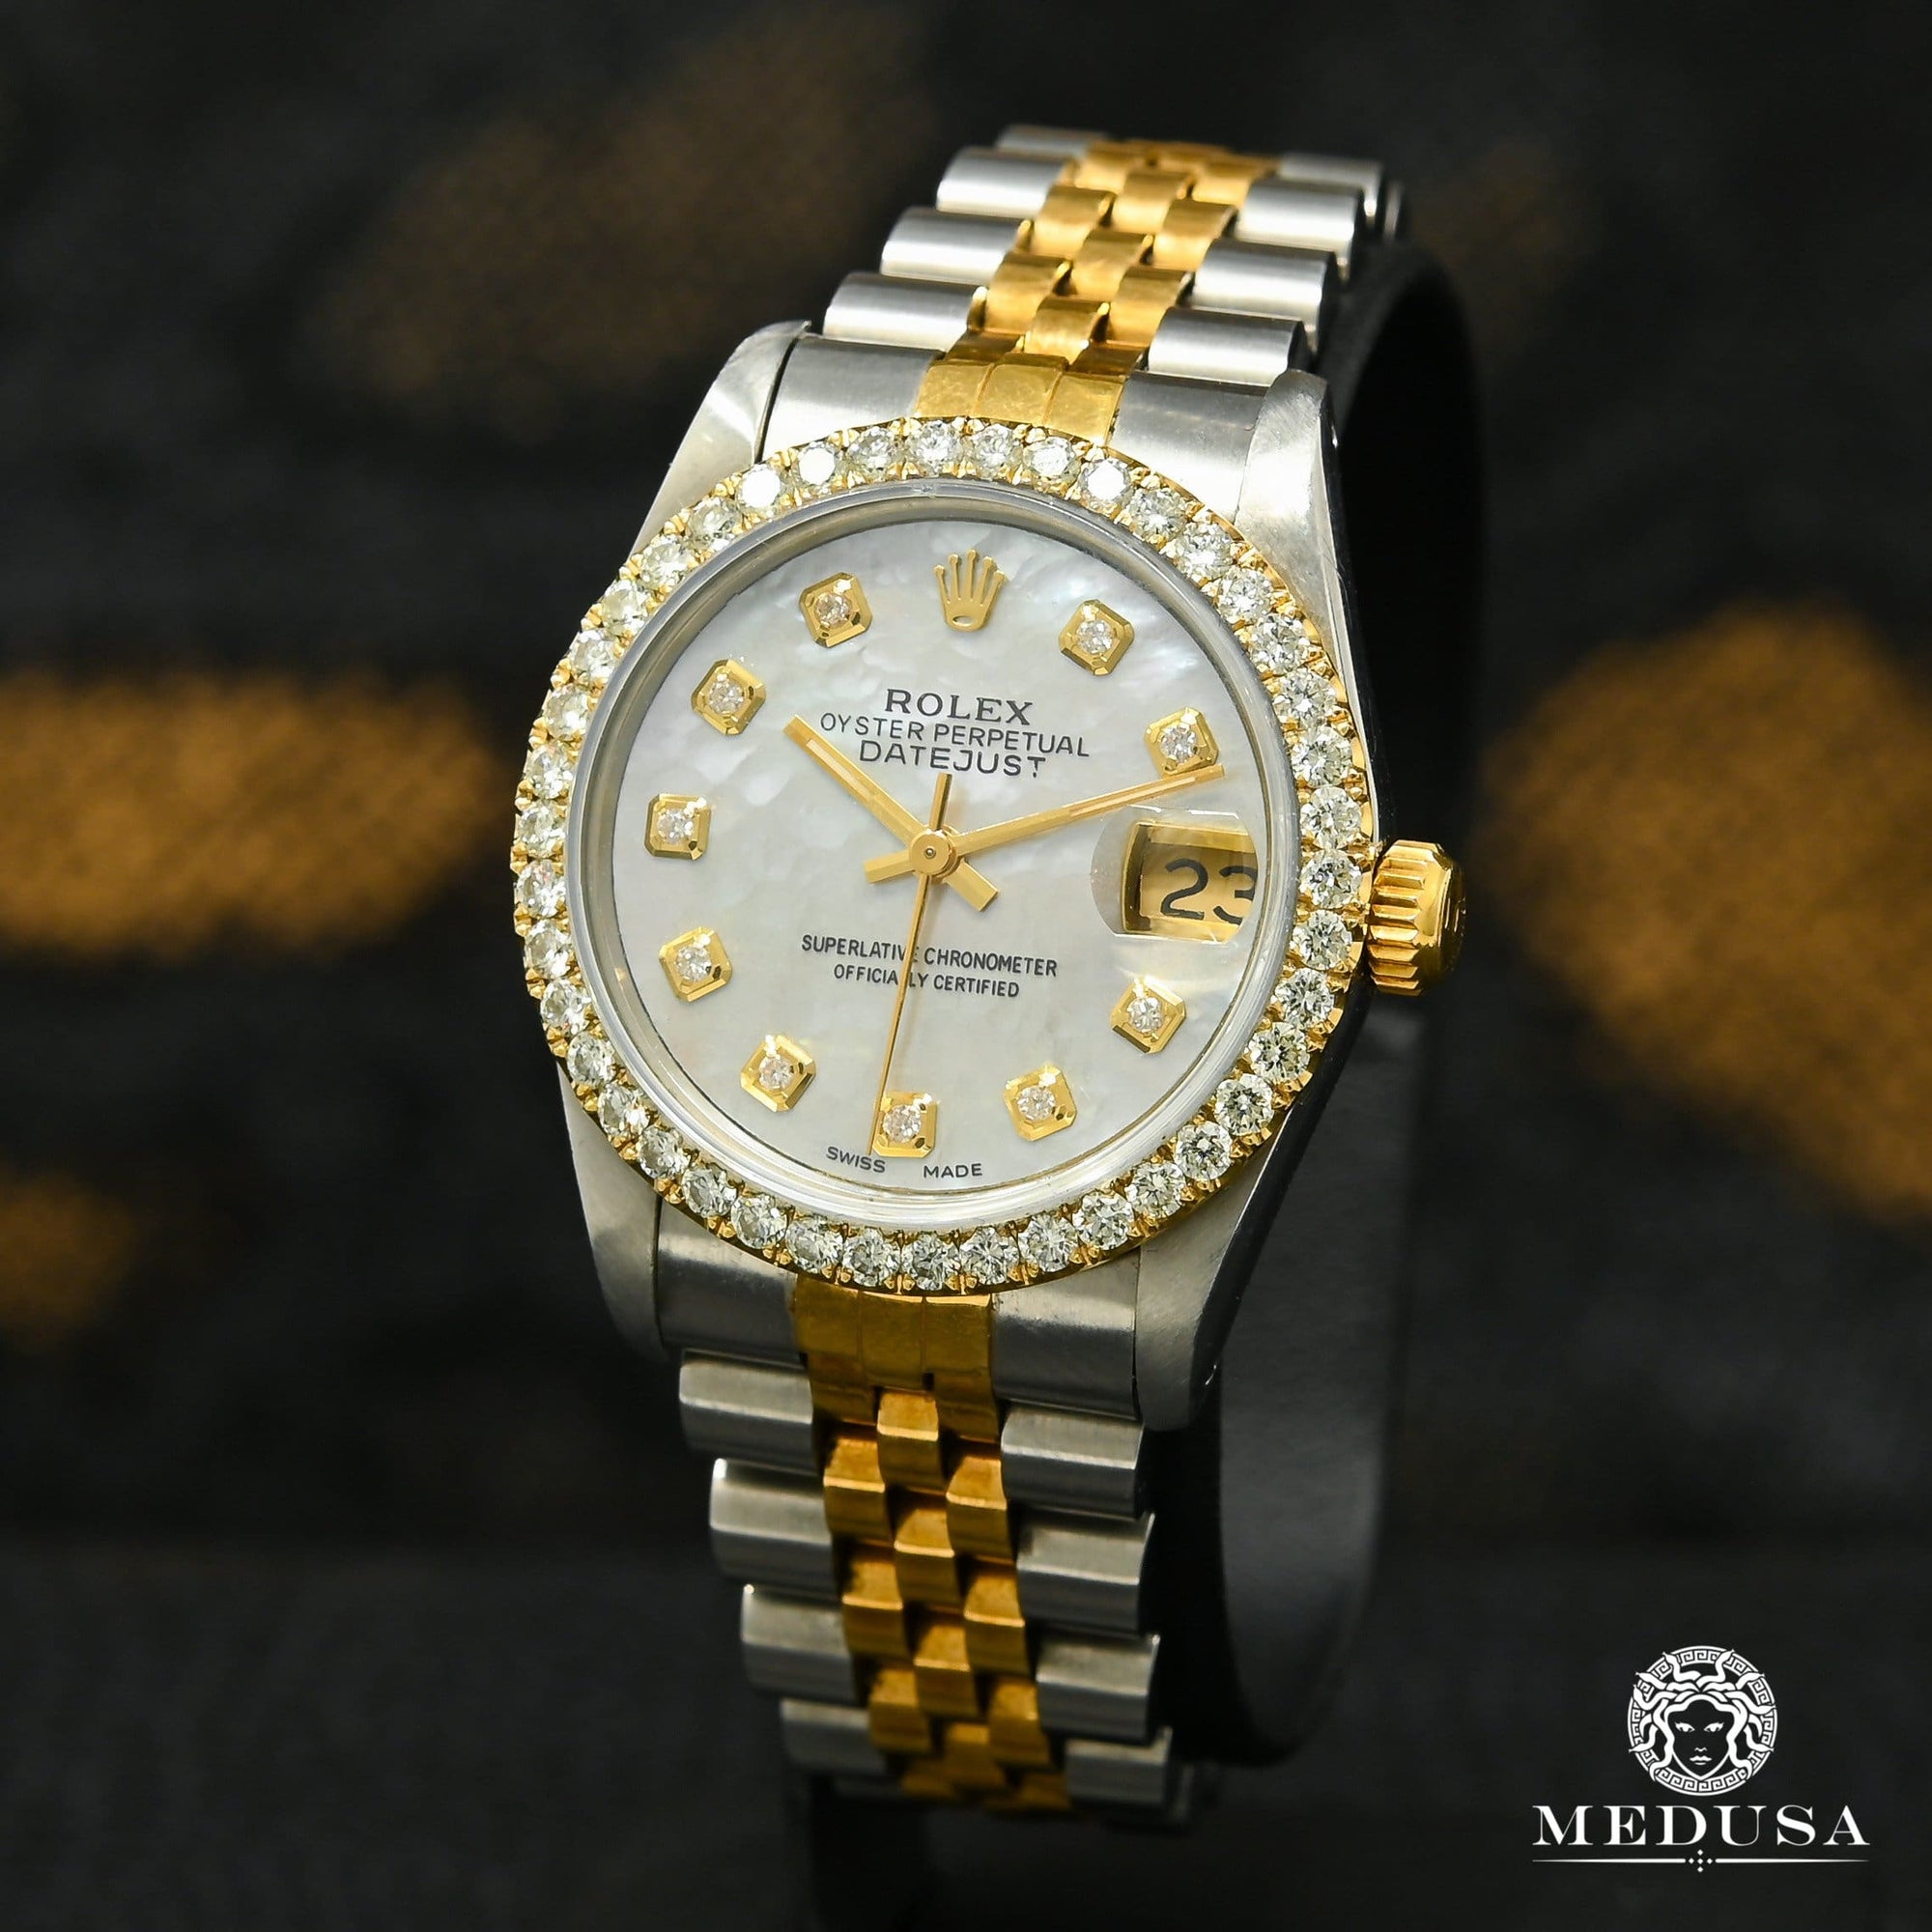 Rolex watch | Rolex Lady-Datejust Women's Watch 31mm - White ''Mother of Pearl'' Gold 2 Tones